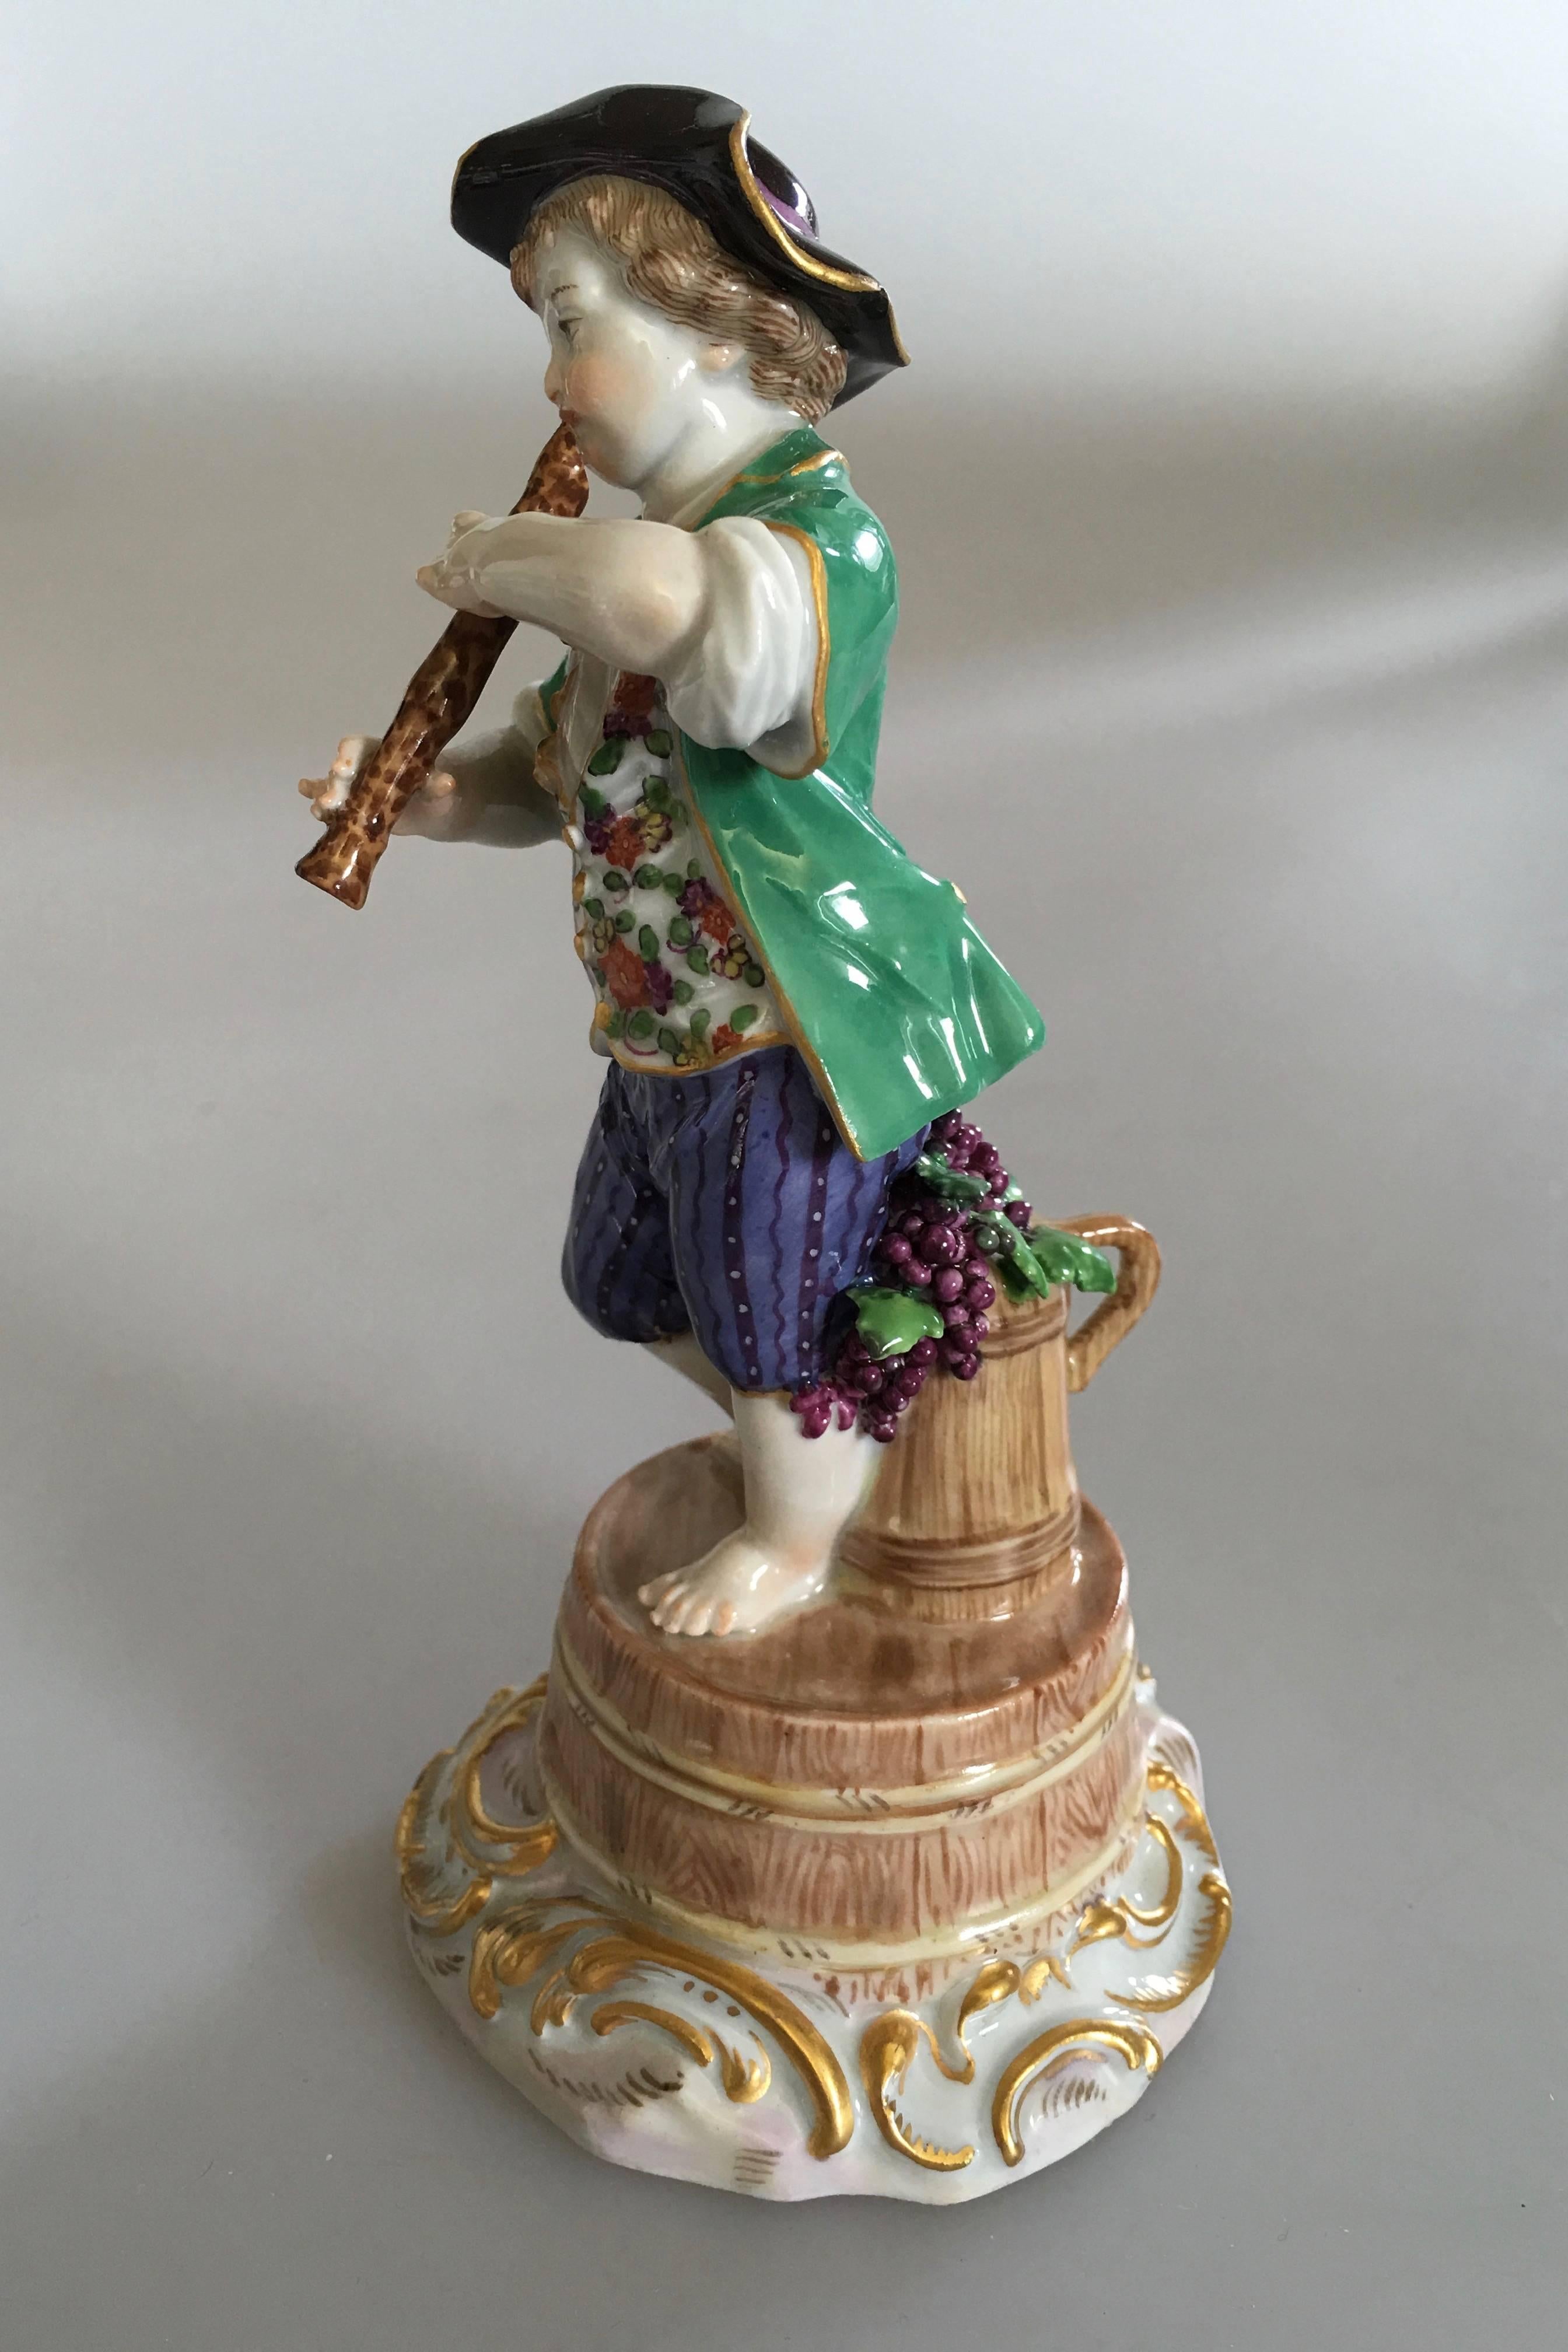 Meissen Figurine of Boy with Flute and Wine Barrel. Likely from after 1934 